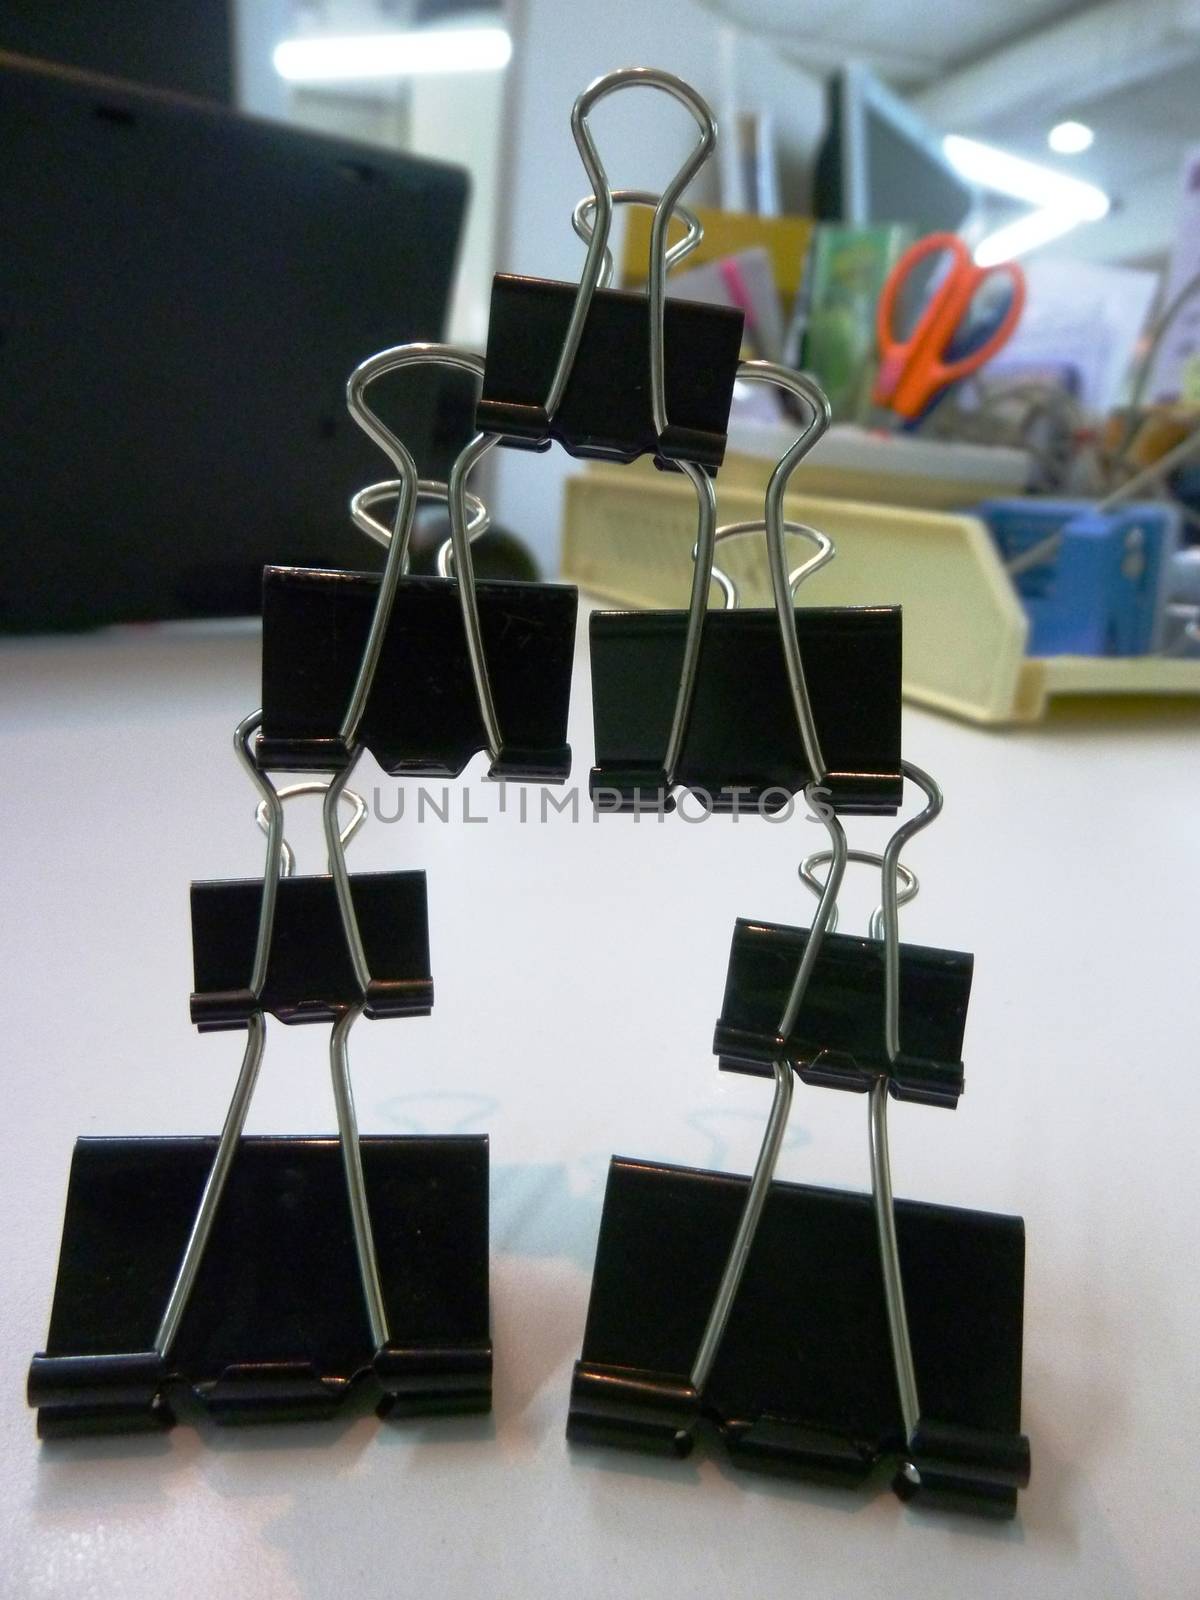 Do a pyramid of the black Paper Clips